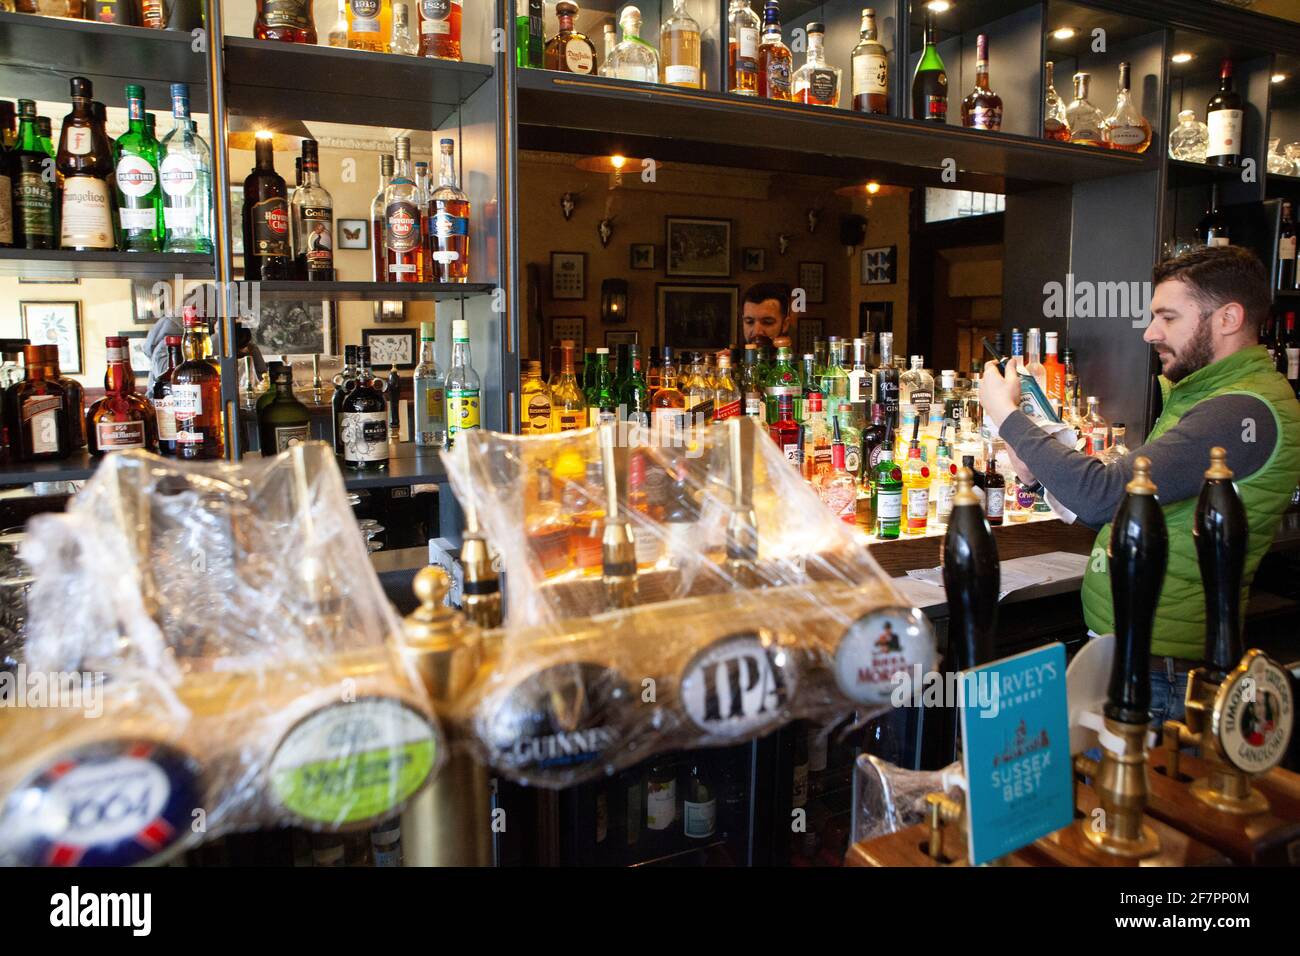 London, UK, 9 April 2021: The Abbeville pub, in Clapham, gets ready for re-opening for outdoor drinks and dining on their terrace from 12th April. While the beer taps are kept clean under plastic wrapping, barman Klodian dusts bottles of spirits. Anna Watson/Alamy Live News Stock Photo